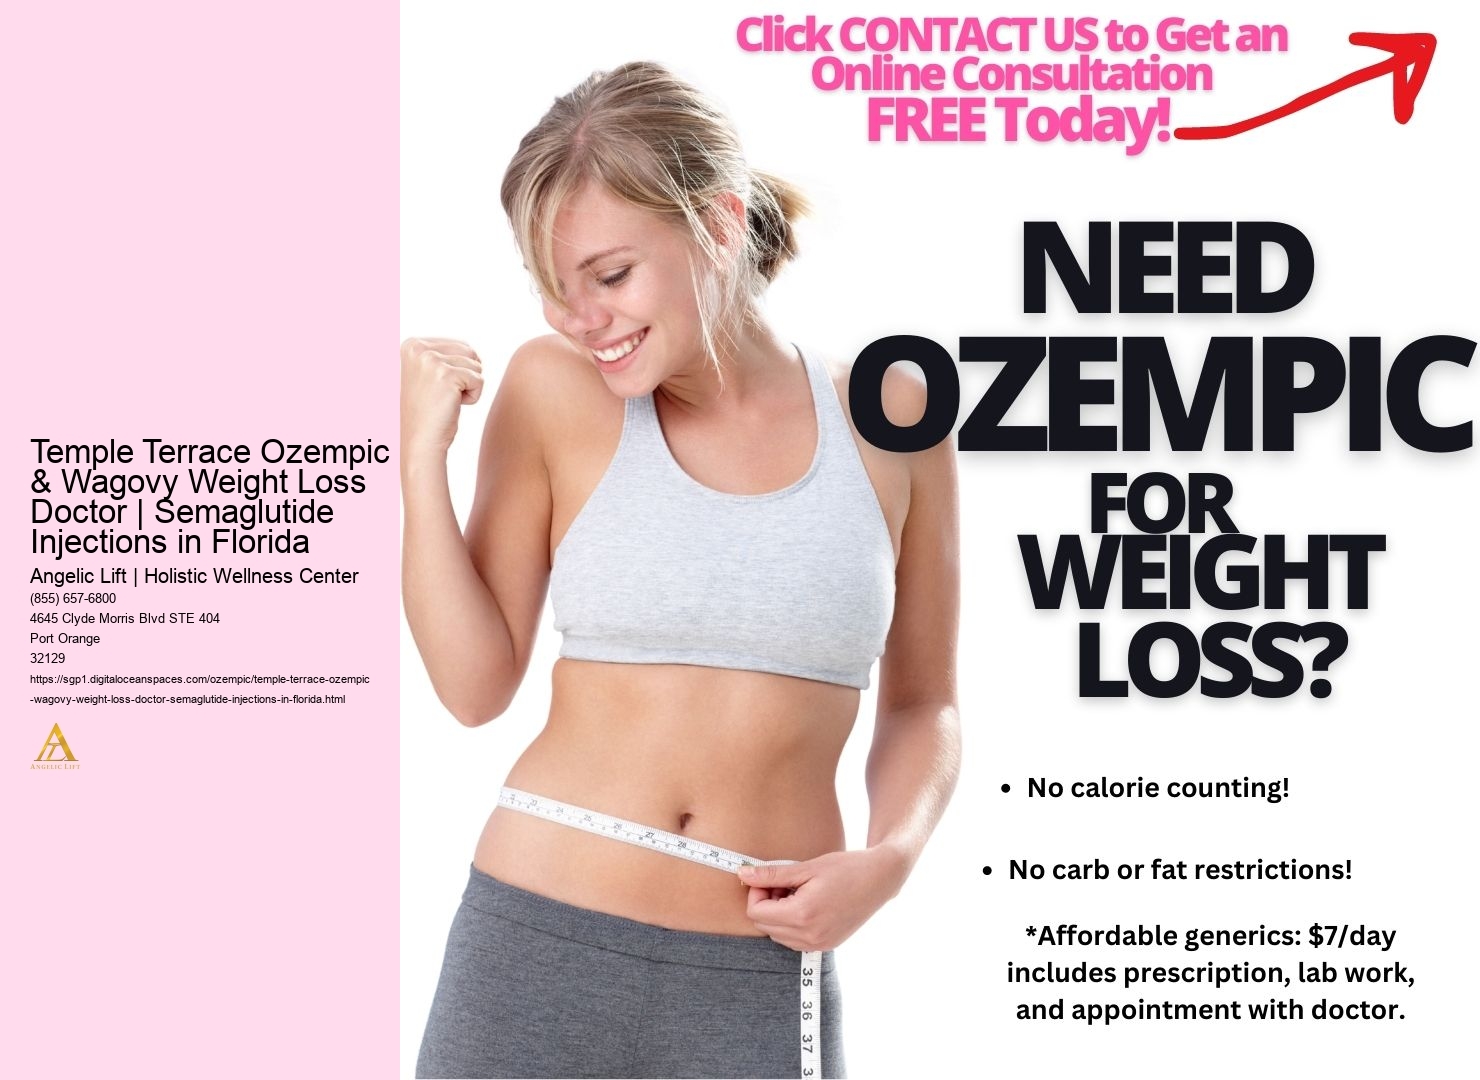 Temple Terrace Ozempic & Wagovy Weight Loss Doctor | Semaglutide Injections in Florida